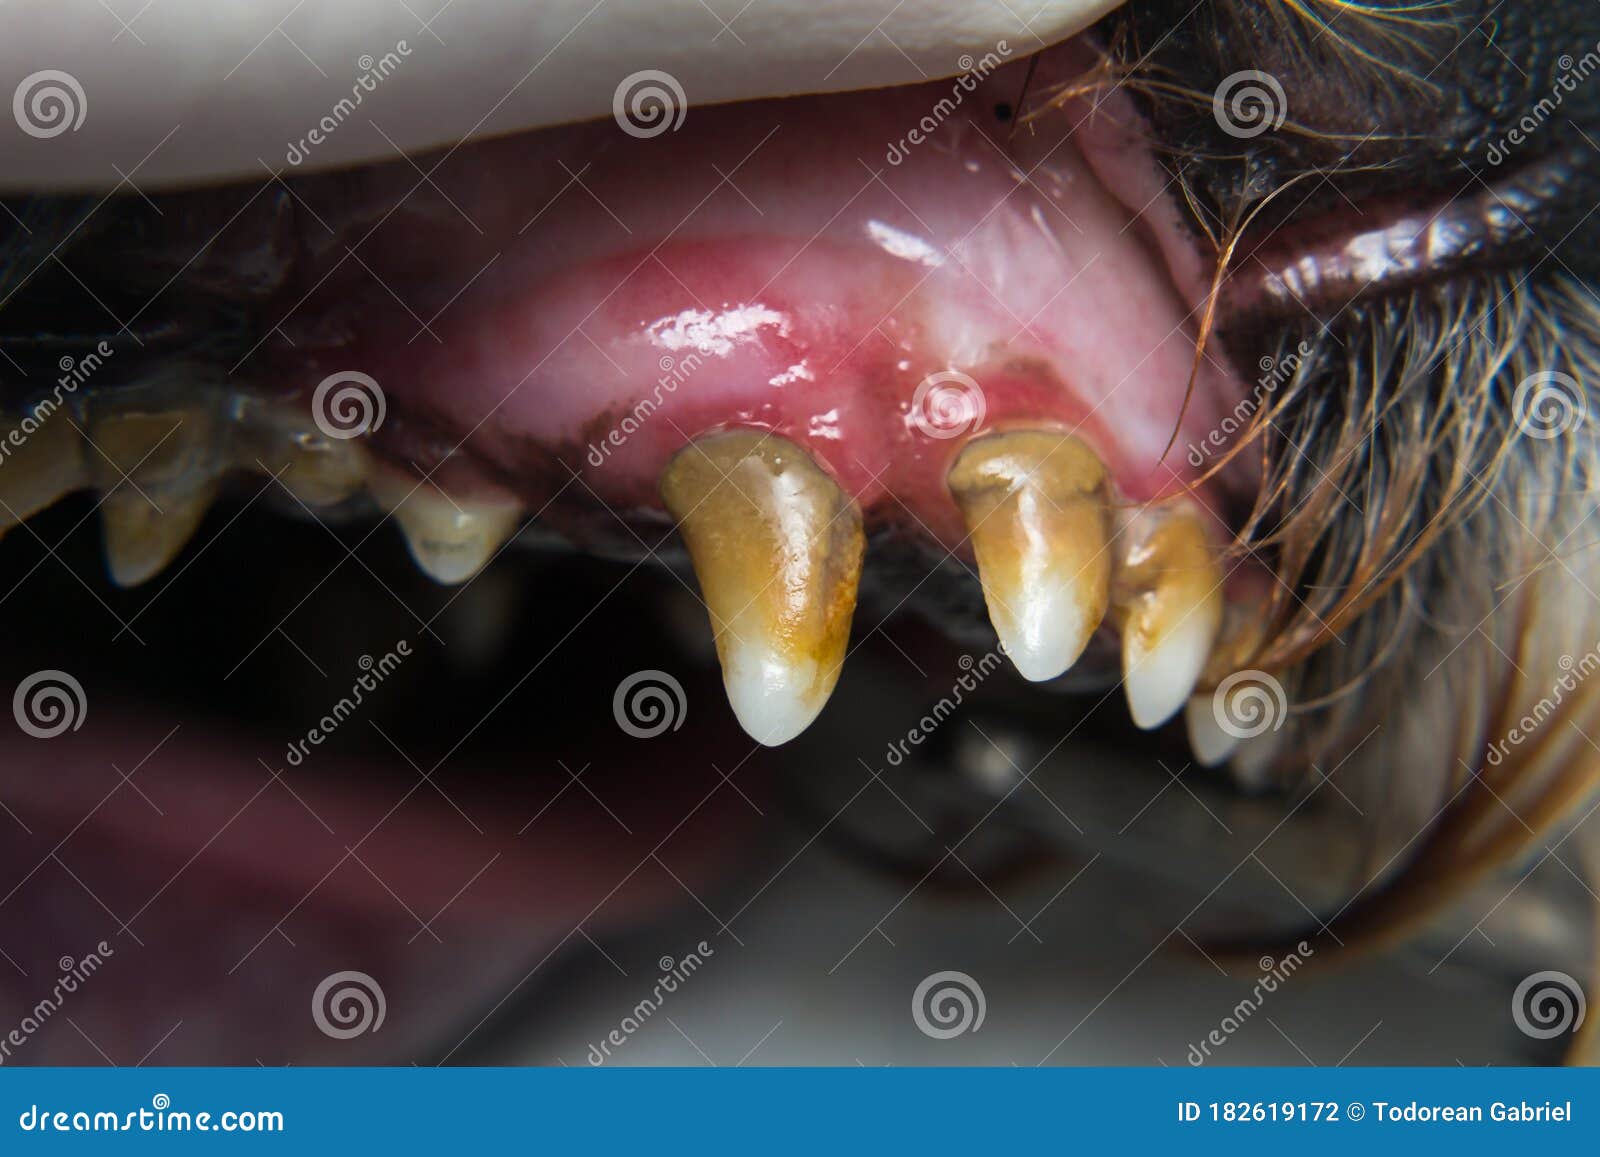 Dog With Gingivitis And Teeth With Tartar Stock Photo Image Of Stinky